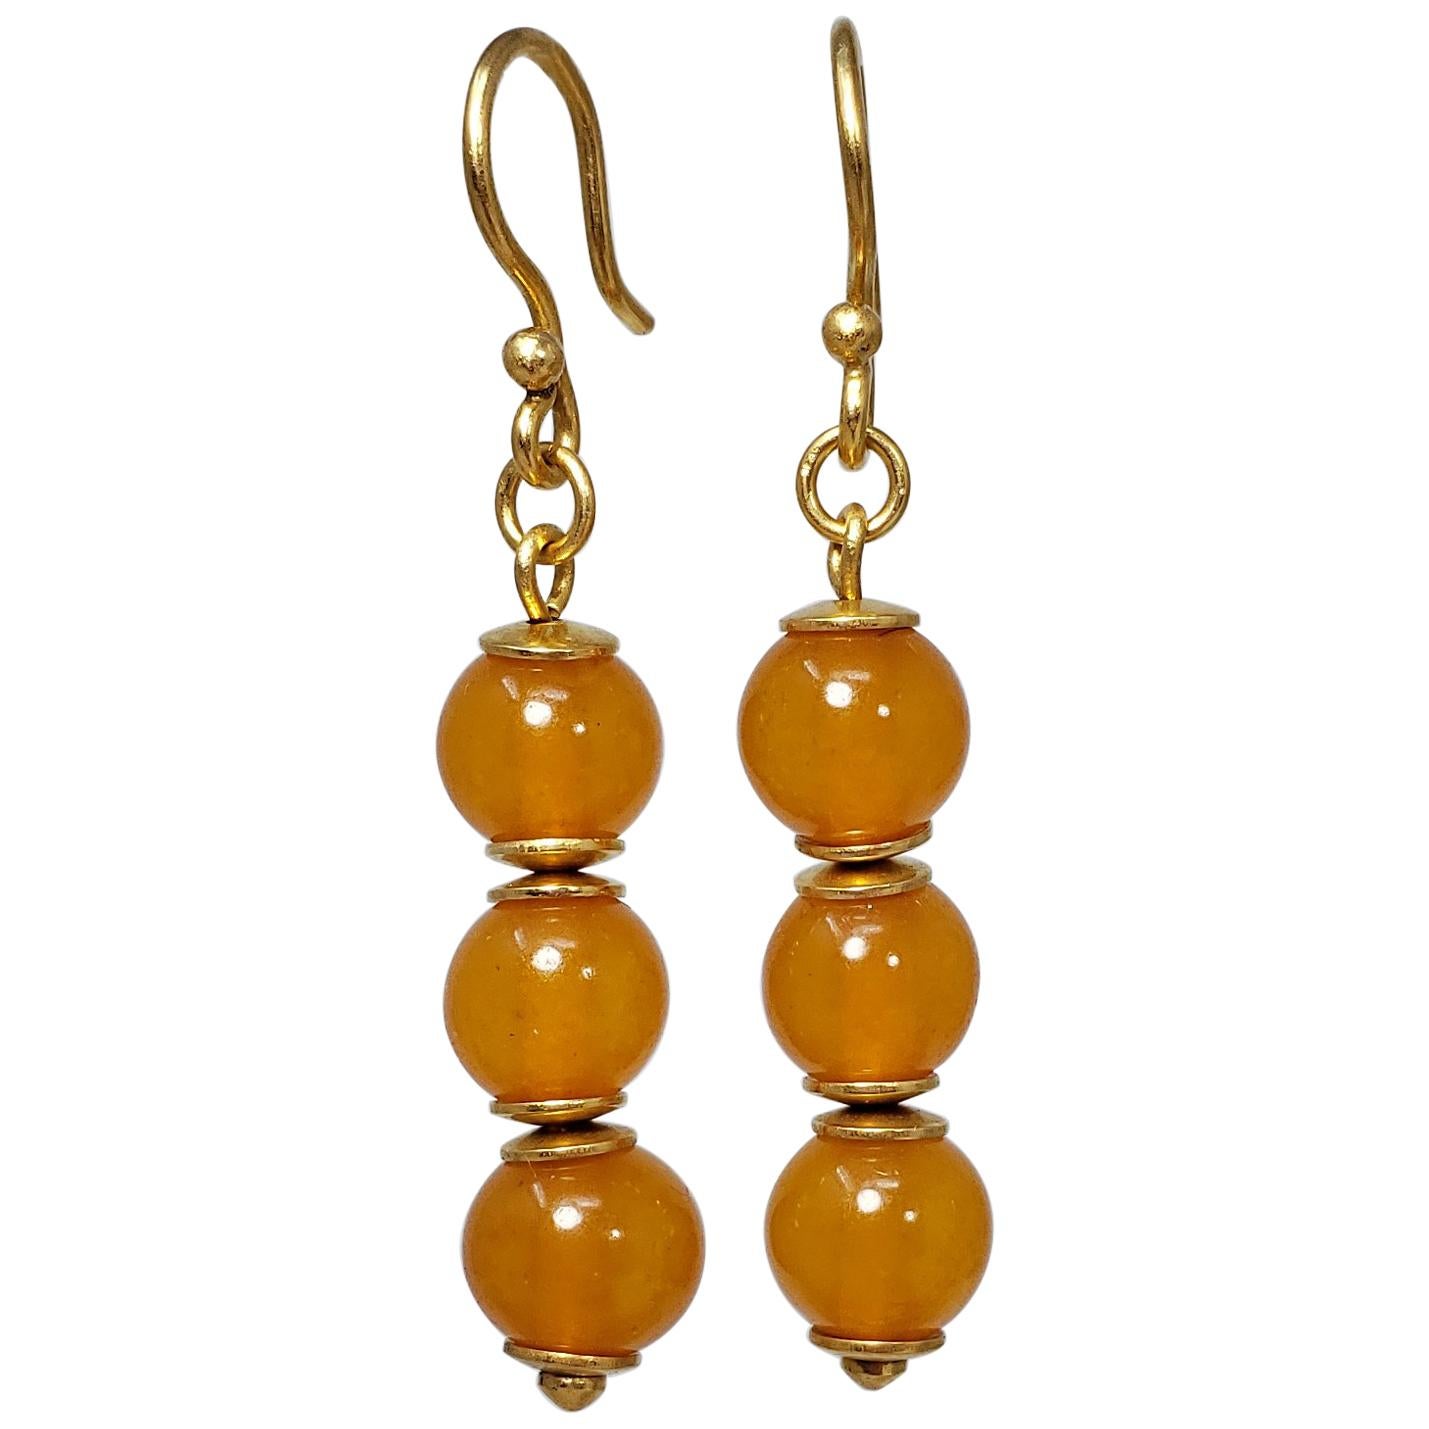 Russian Orange Baltic Amber Bead Dangling Earrings in Gold, Early to Mid 1900s